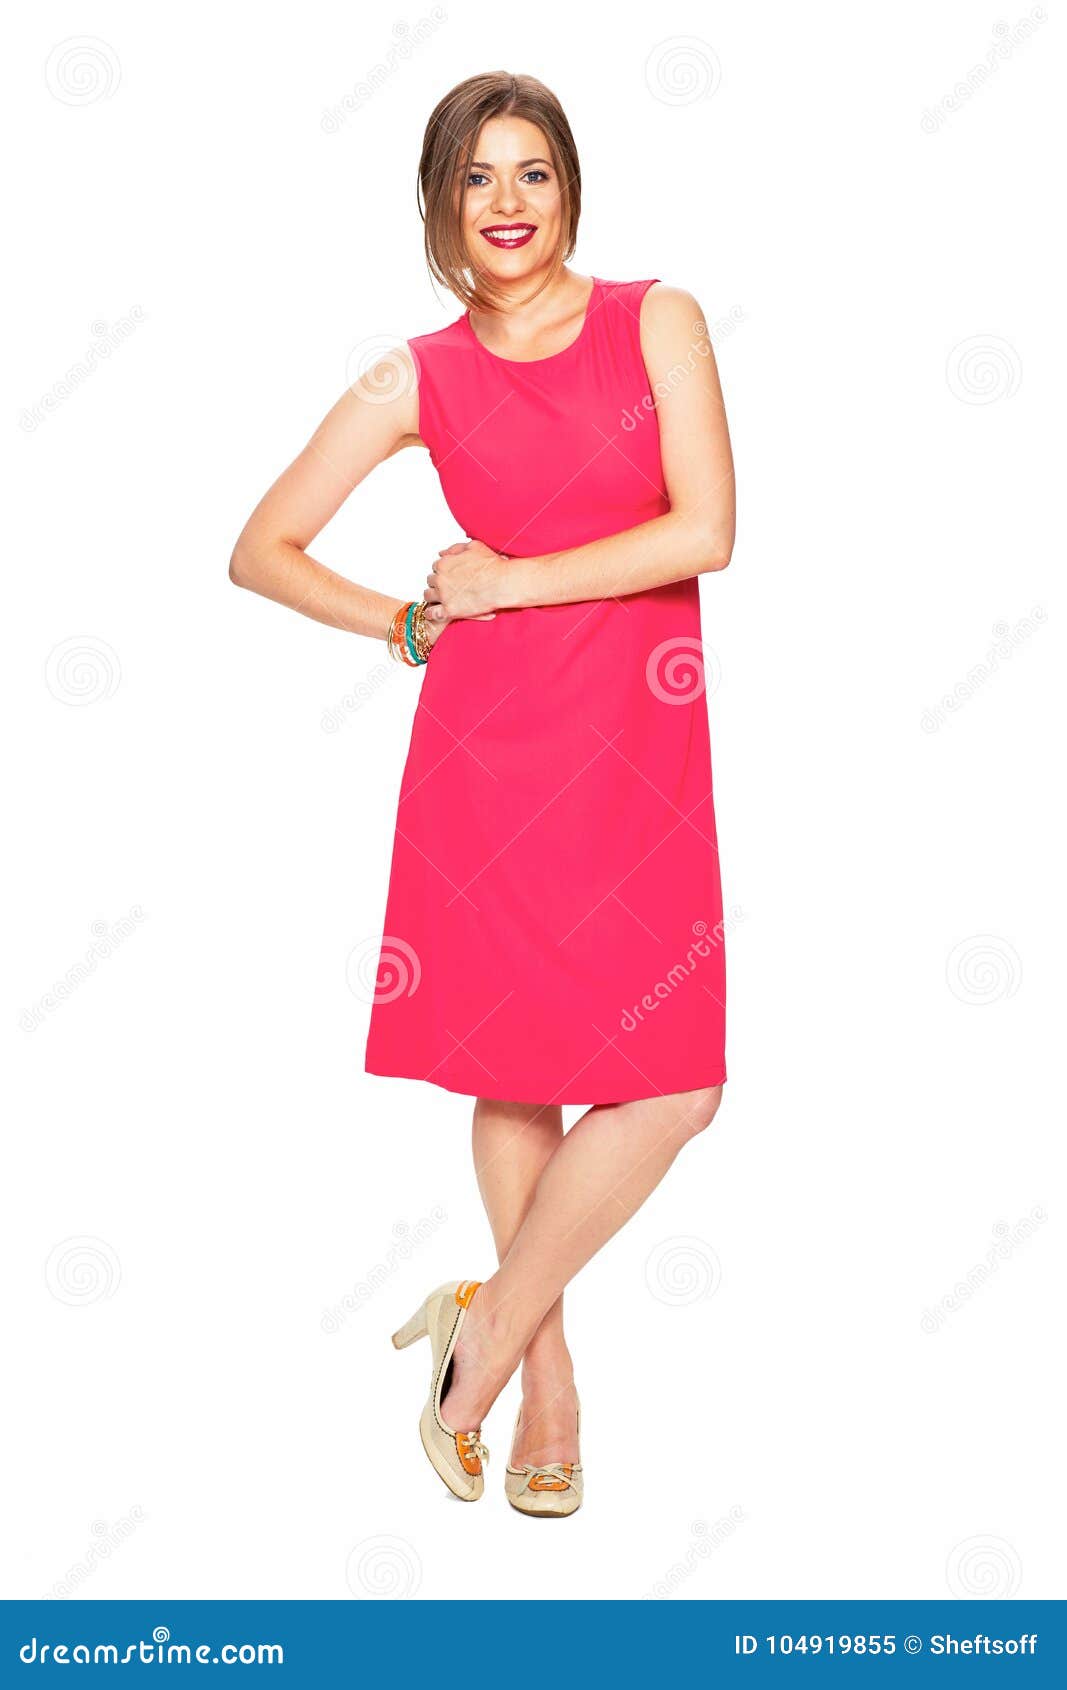 Full Body Portrait of Smiling Woman in Red Dress. Stock Image - Image ...